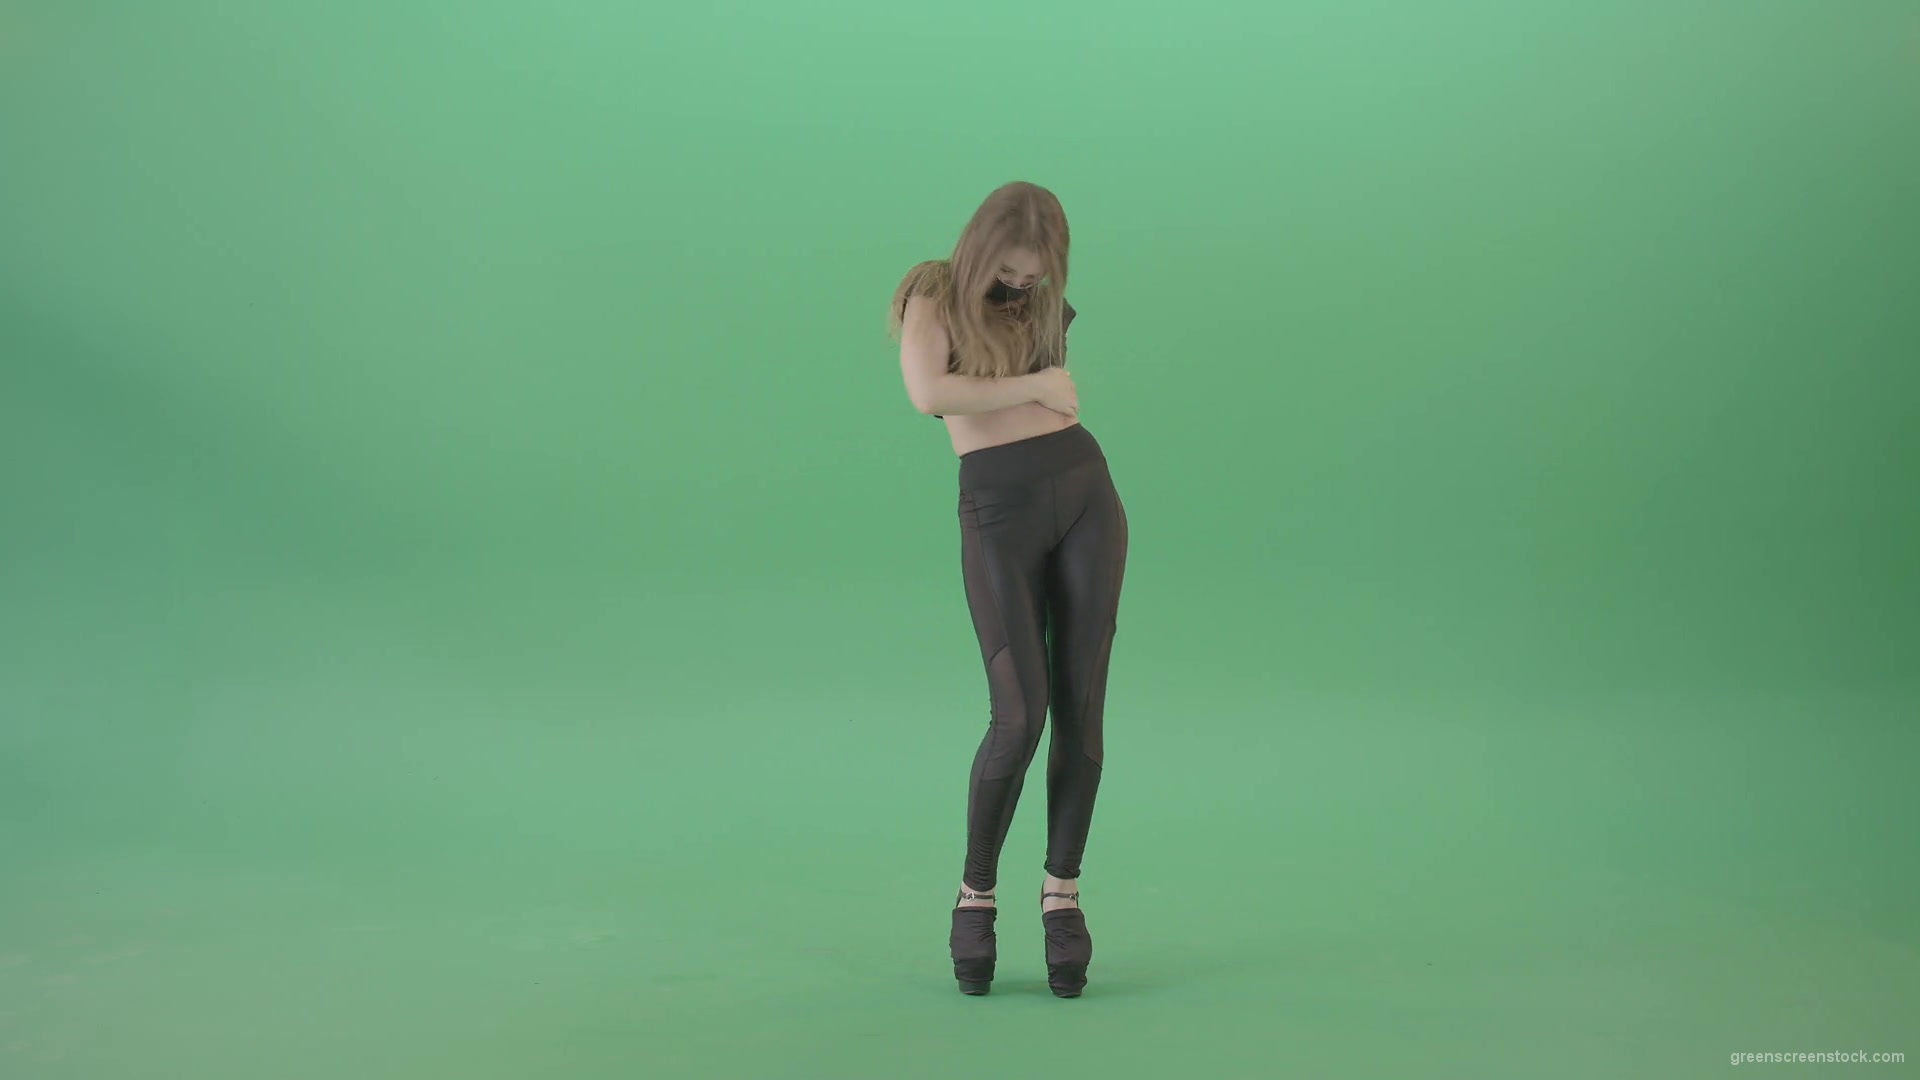 Sexy-girl-in-black-mask-and-costume-dancing-with-erotic-moves-isolated-on-green-screen-4K-video-footage-1920_007 Green Screen Stock